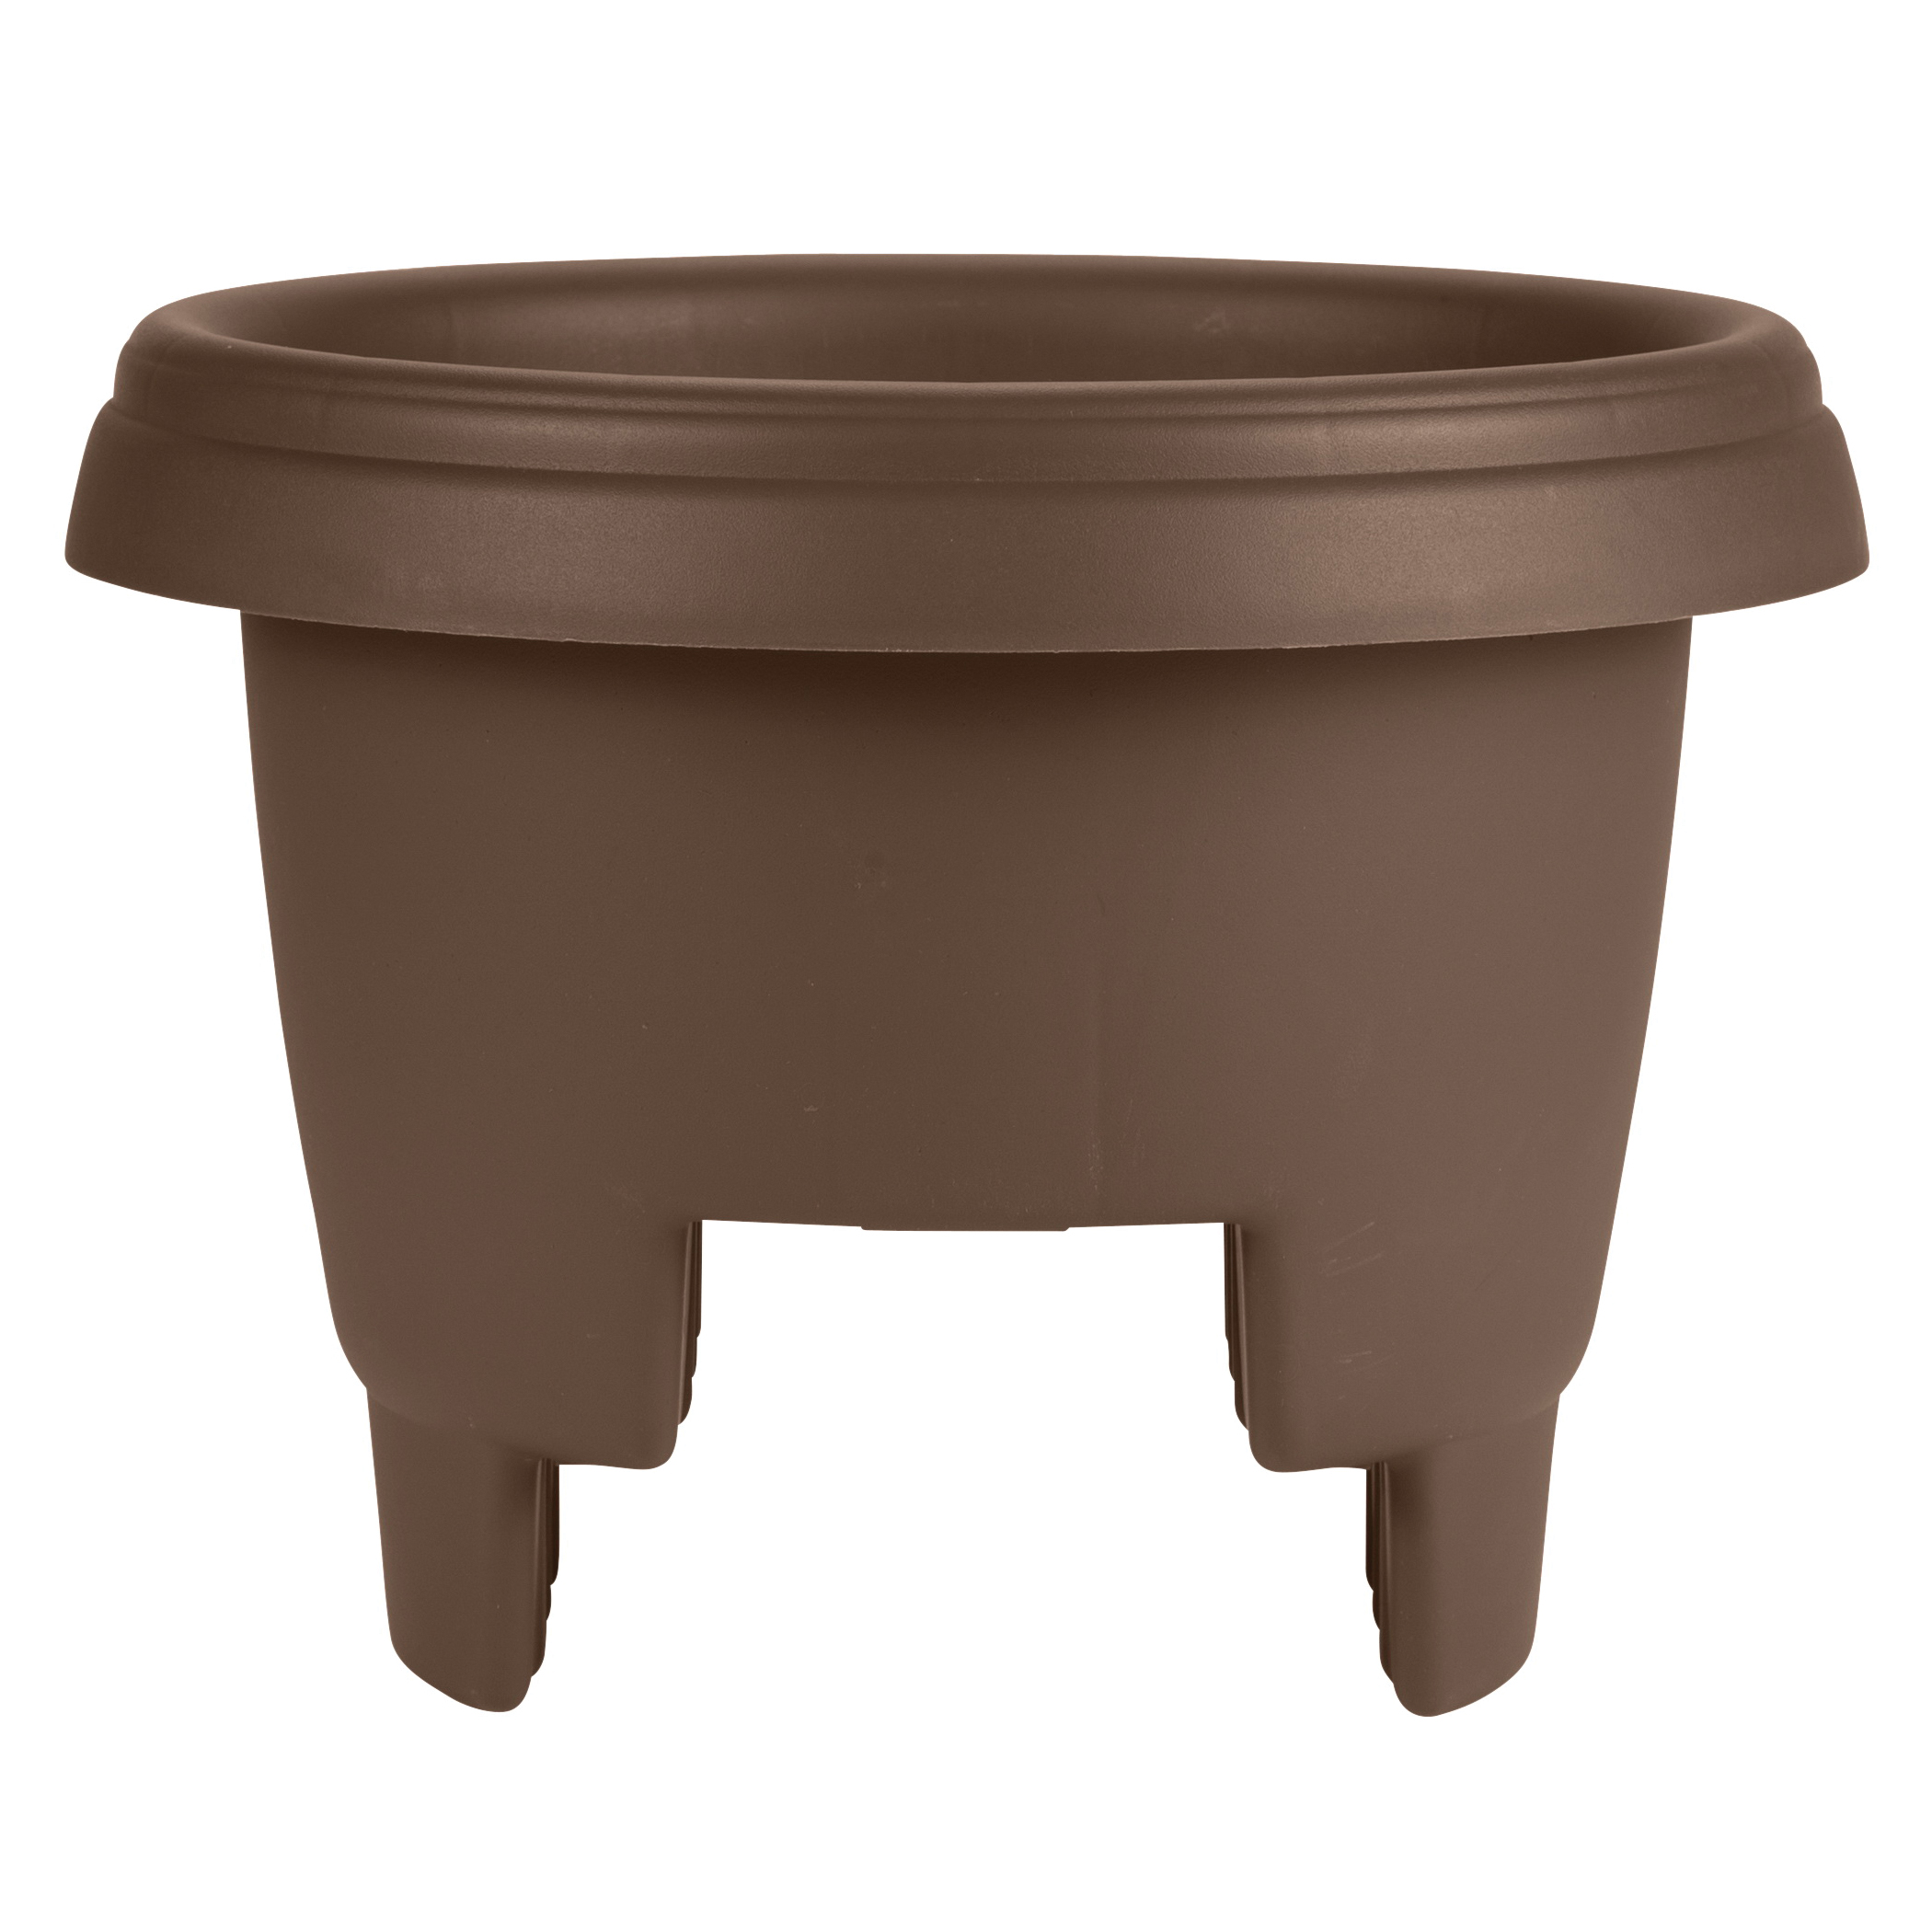 136892 Deck Rail Planter, 11.9 in Dia, 9 in H, Poly, Chocolate